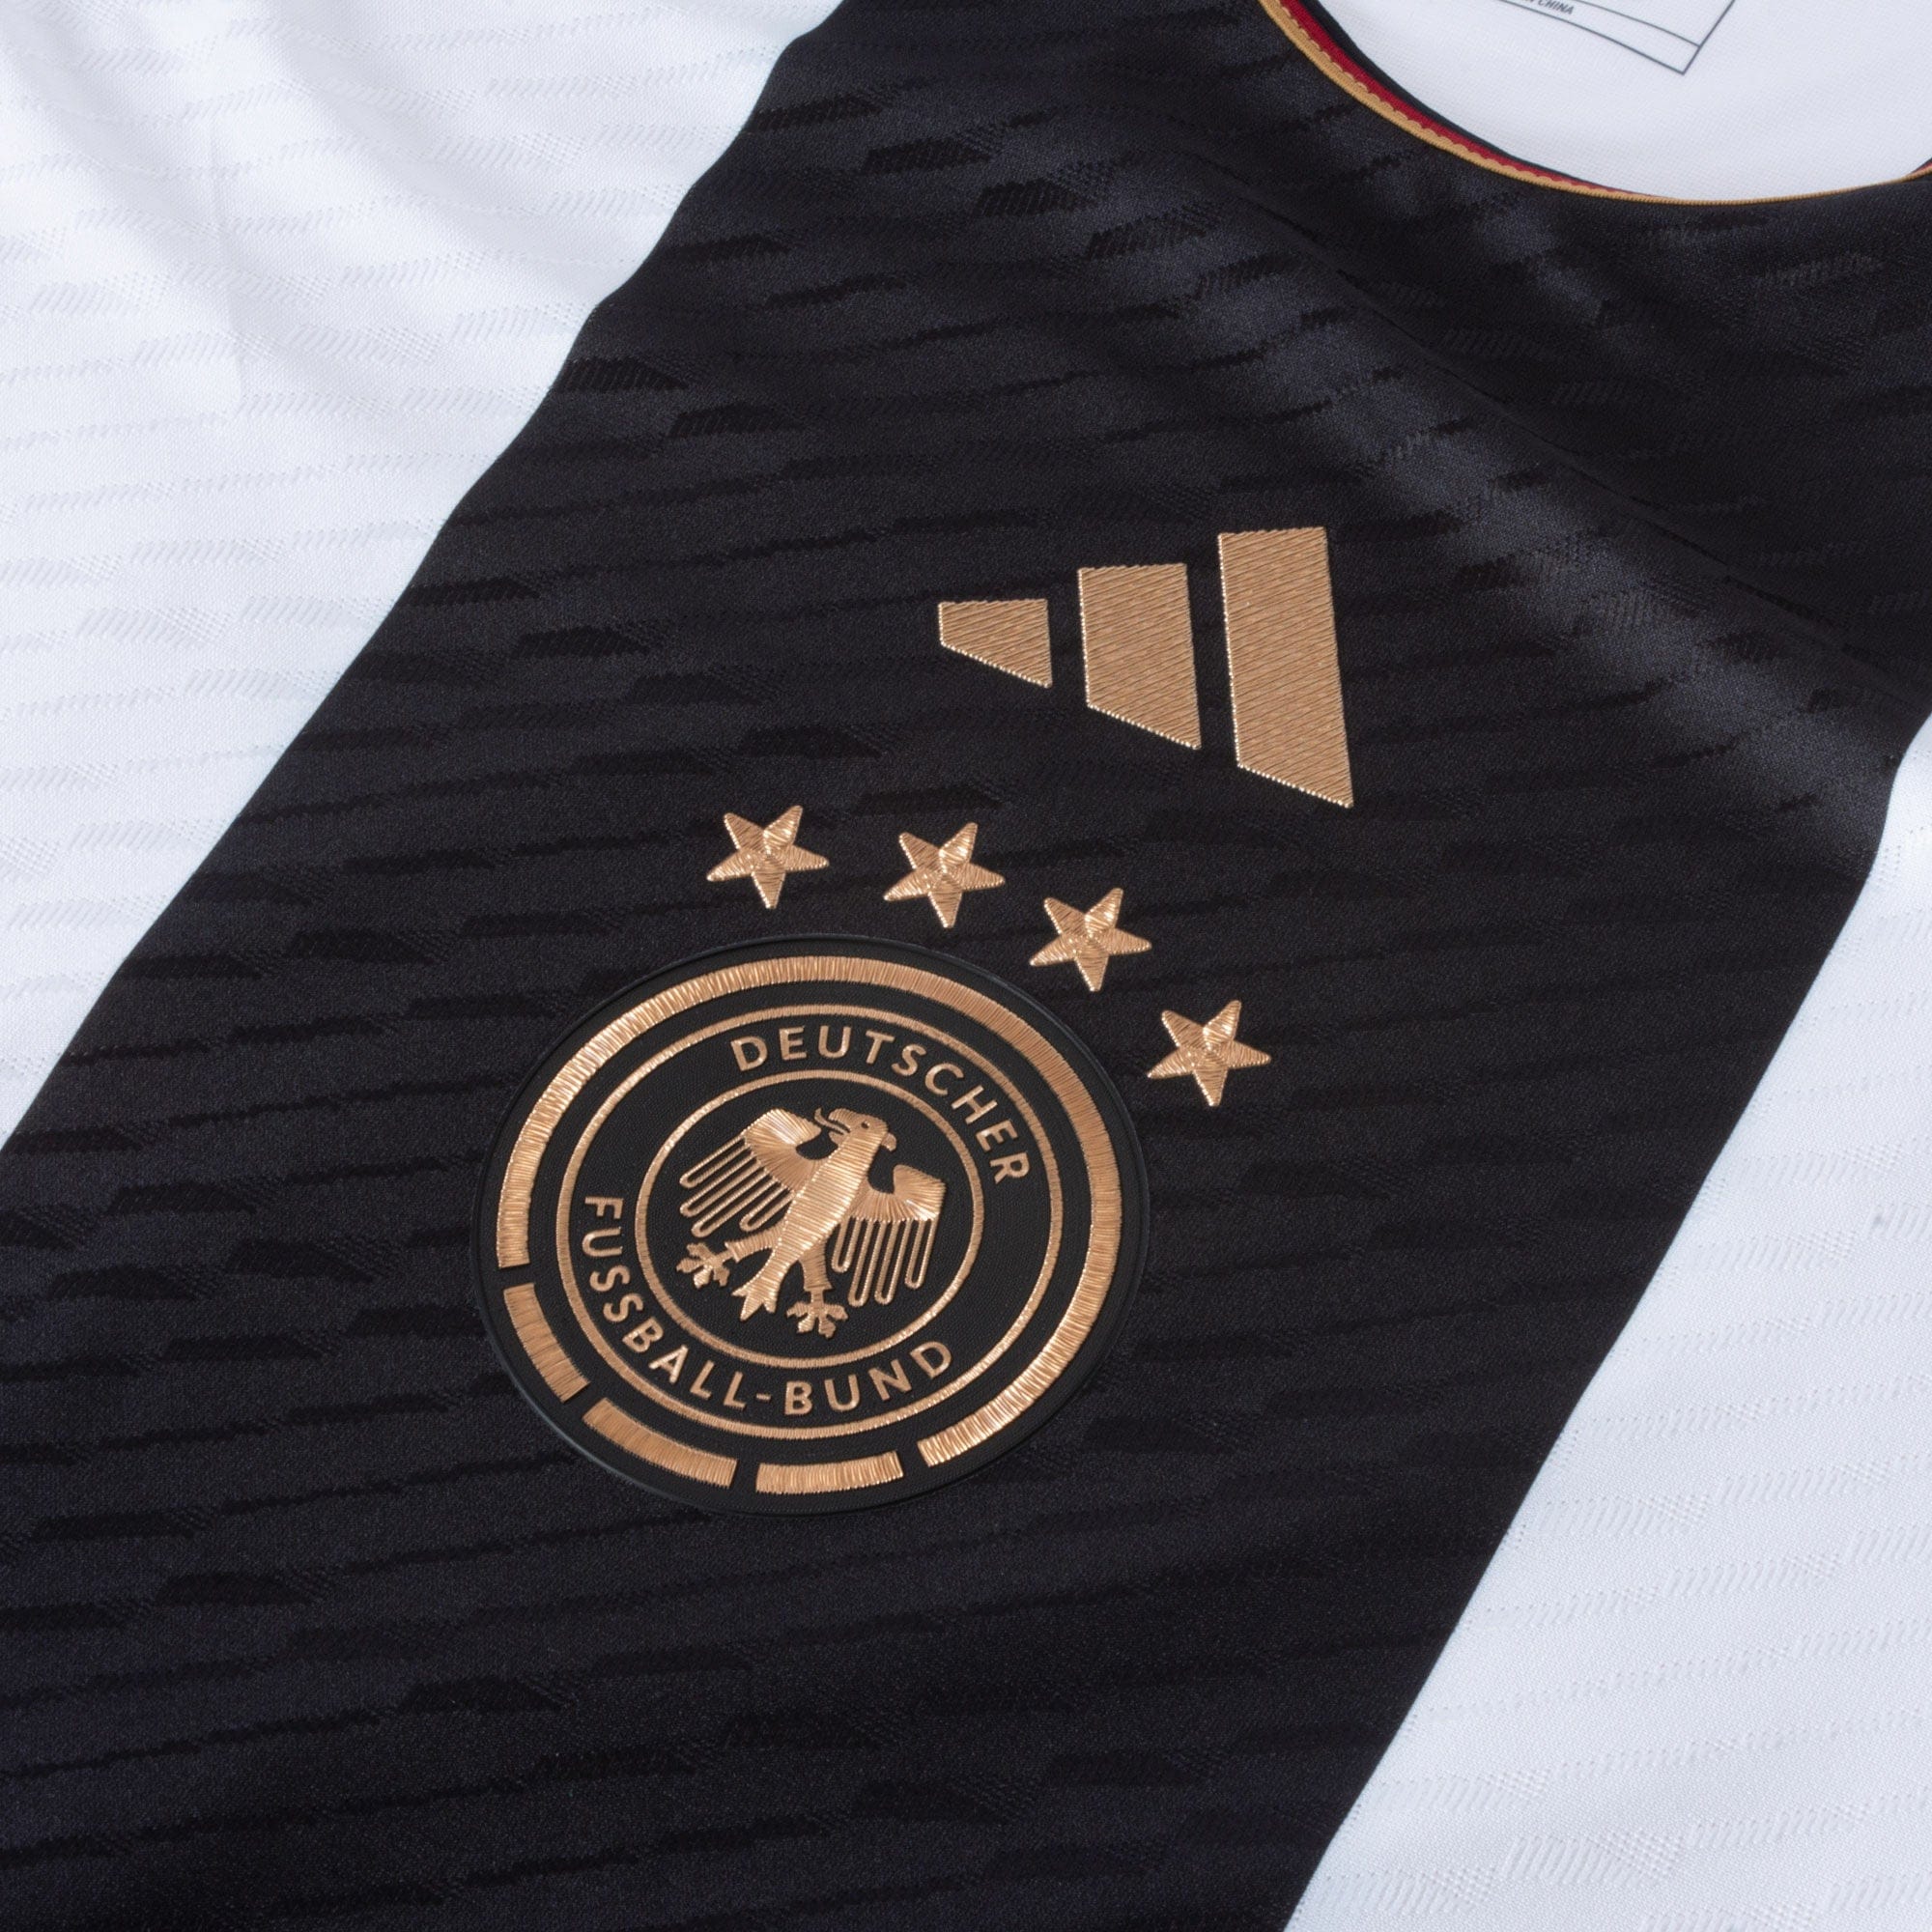 Germany Home Jersey 22/23 Euro 2024 Qualification